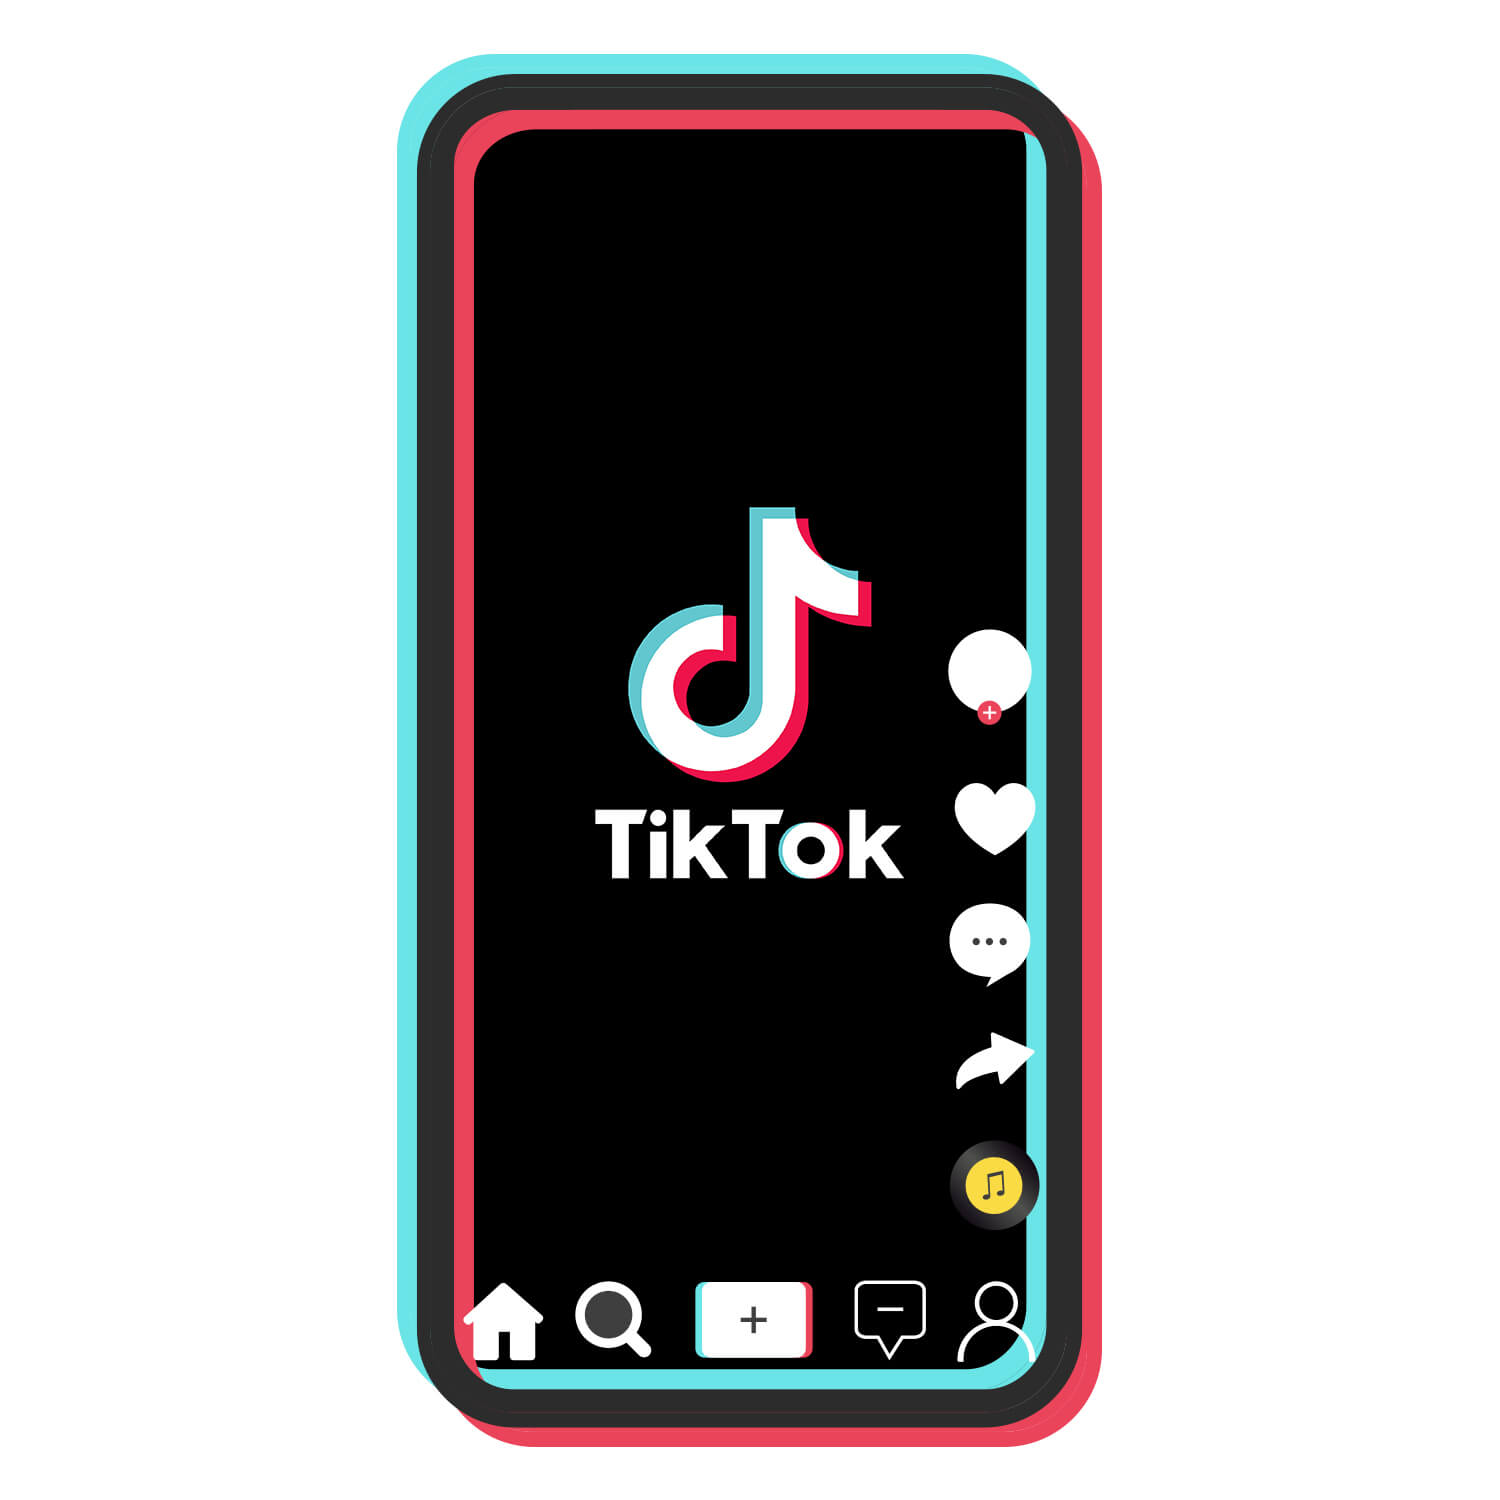 Video Durations Are Extended in TikTok